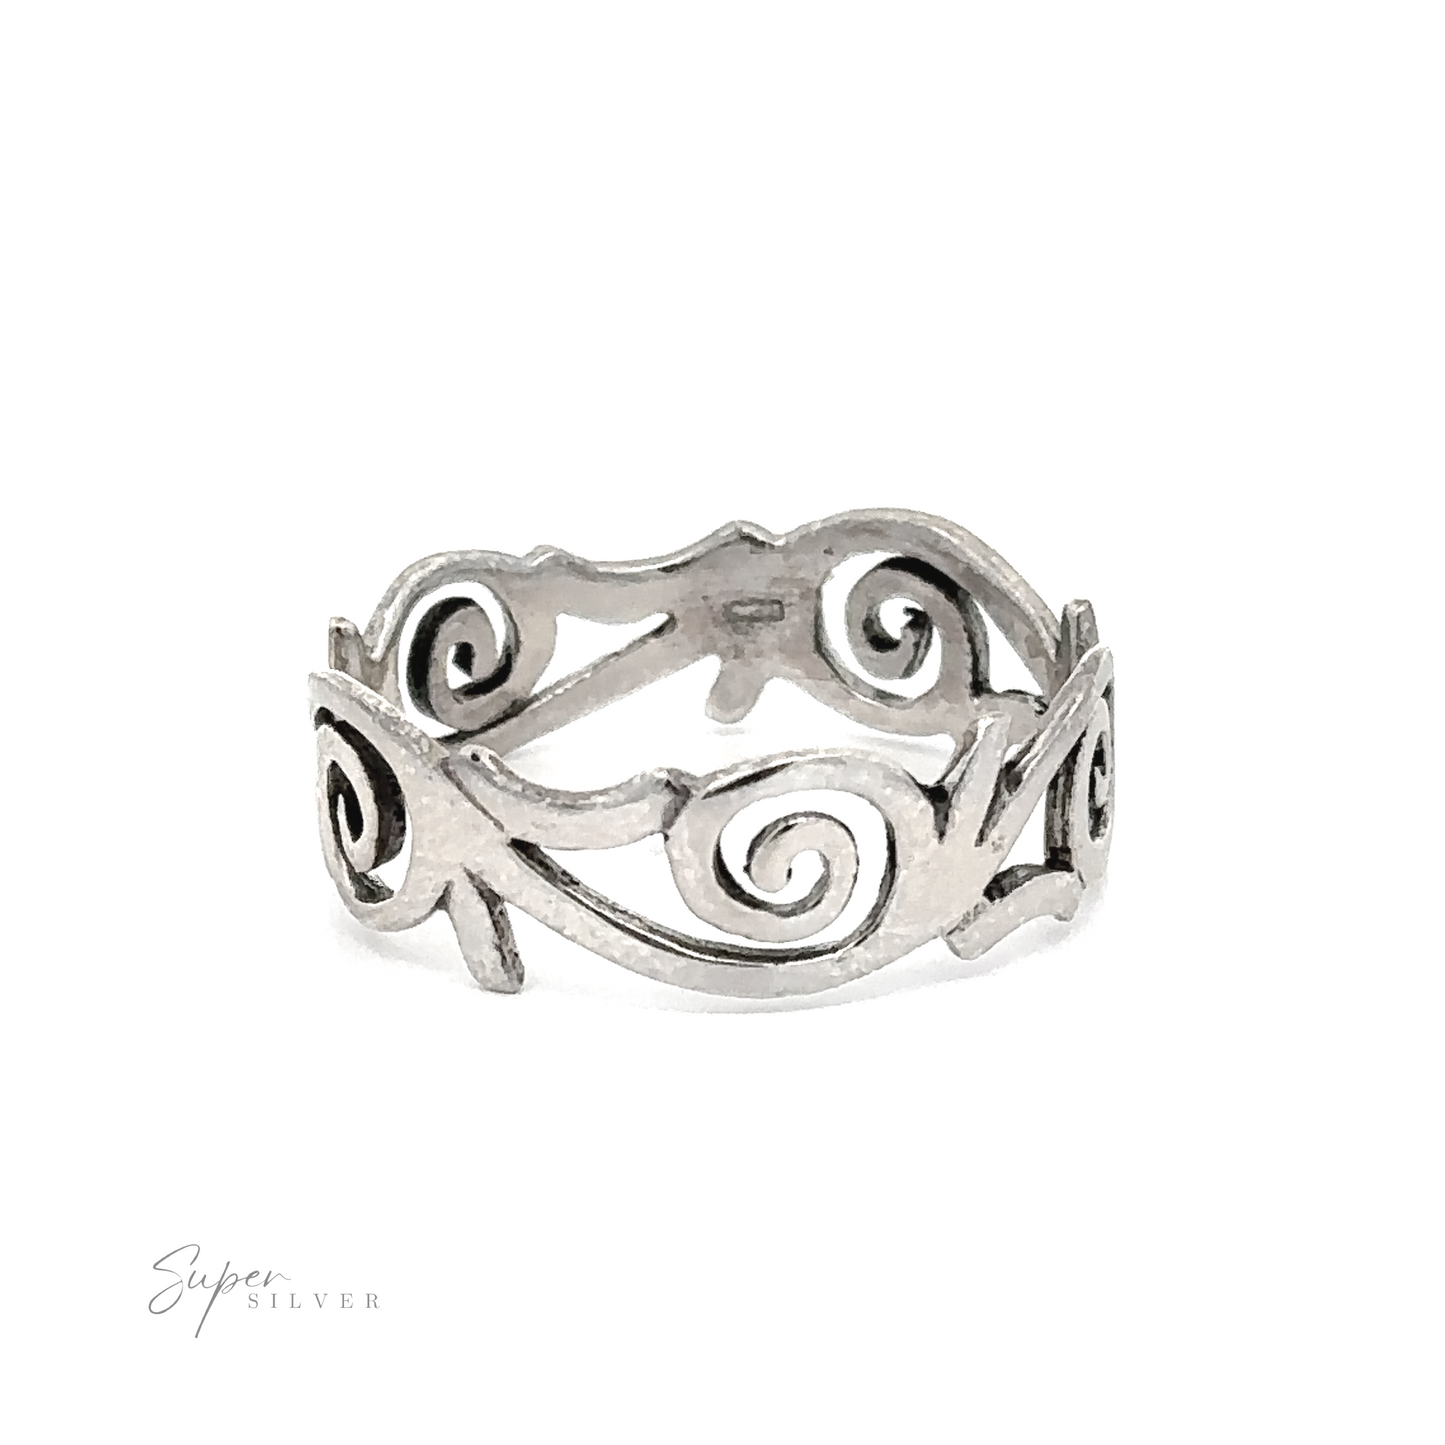 A Sterling Silver Freestyle Swirl Design Ring made of Sterling Silver.